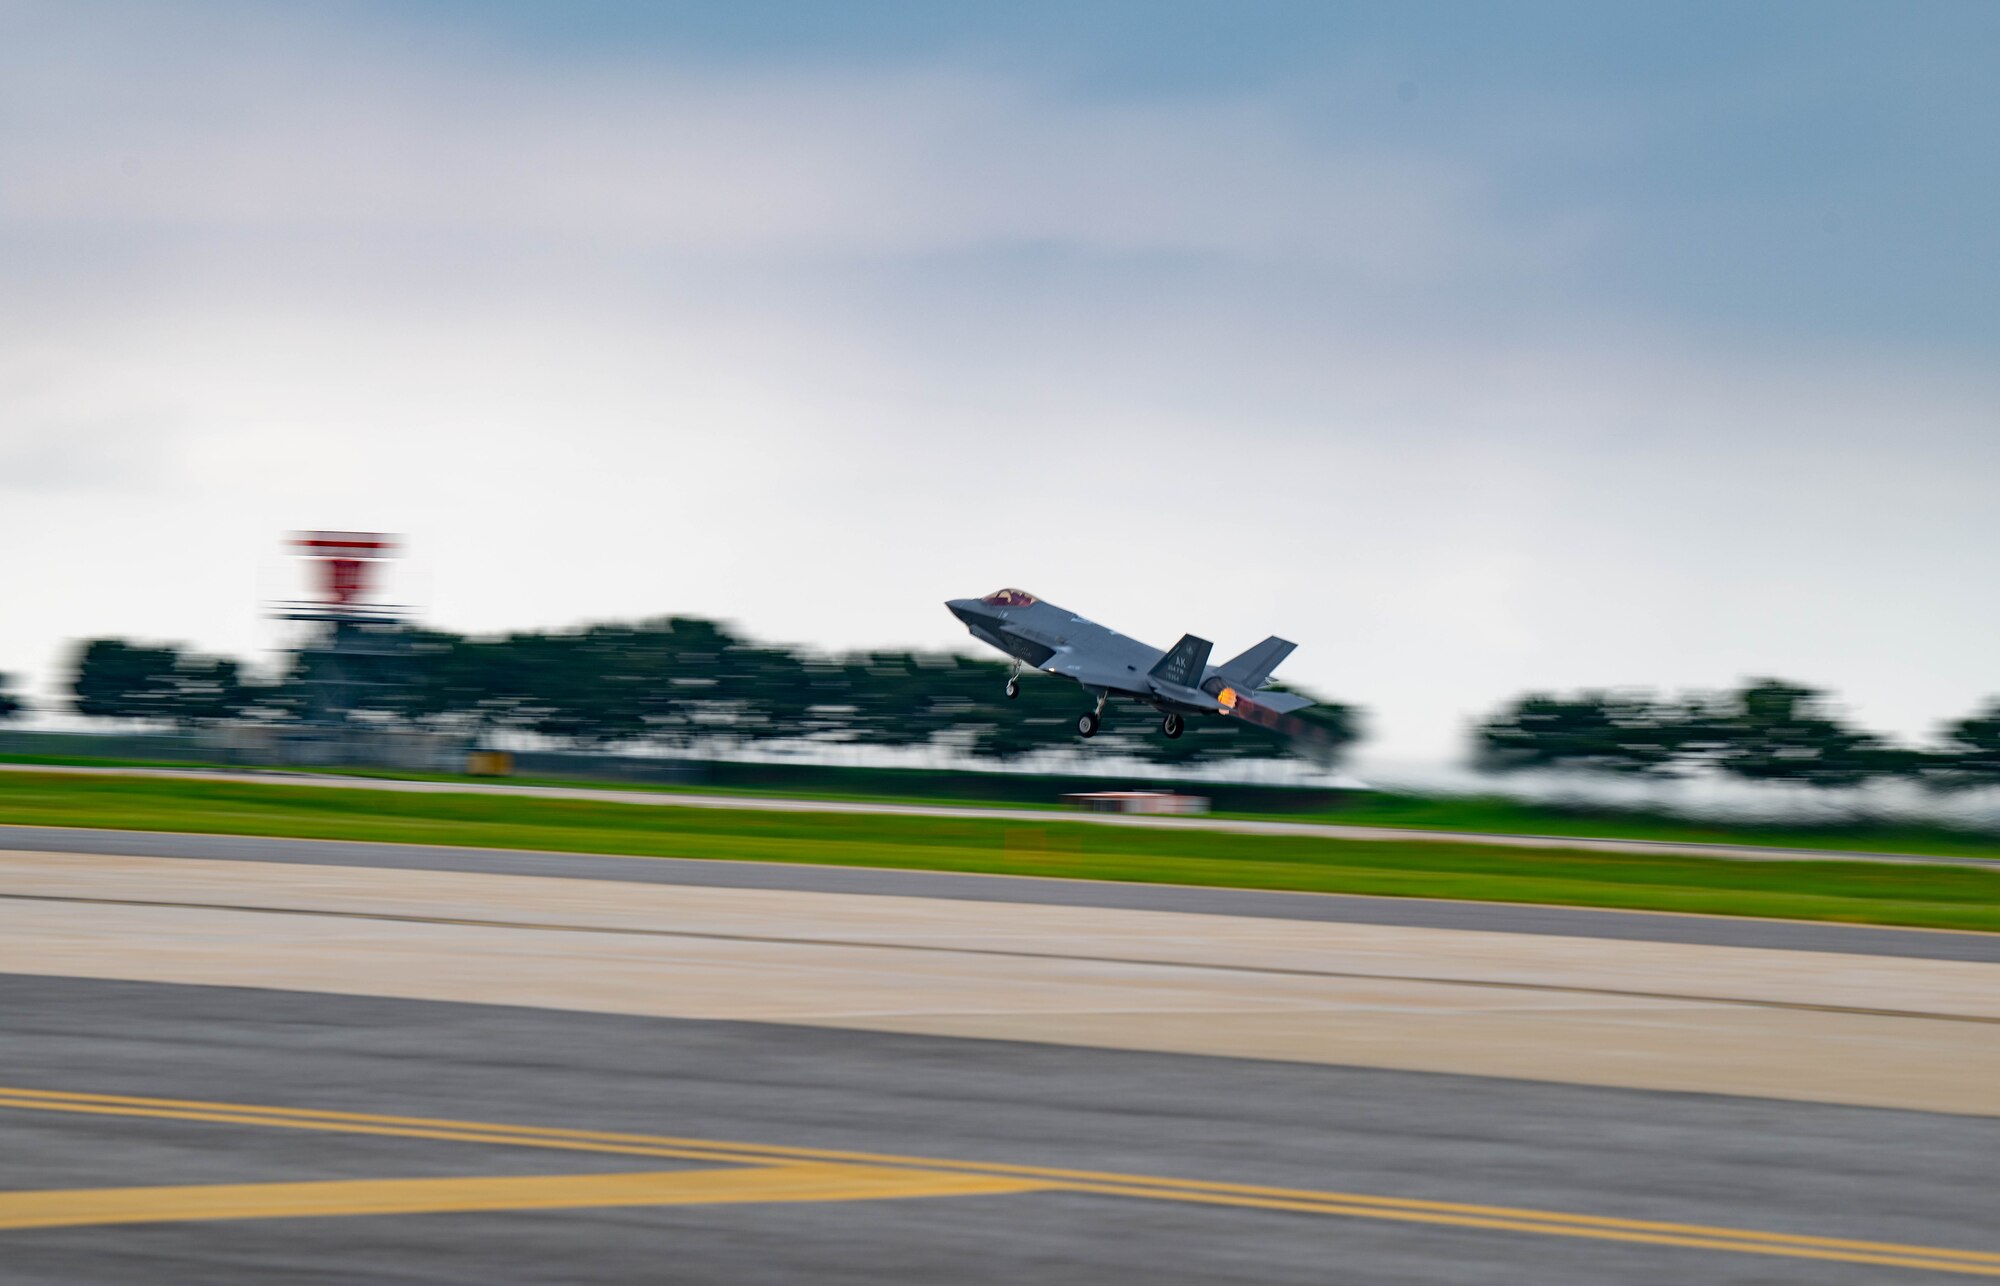 An F-35A Lightning II takes flight at Kunsan Air Base, Republic of Korea, July 11, 2022. U.S. Air Force F-35 aircraft from Eielson Air Force Base, Alaska arrived in the Republic of Korea to conduct training flights with ROKAF to enhance interoperability between the two Air Forces on and around the Korean Peninsula. (U.S. Air Force photo by Senior Airman Shannon Braaten)